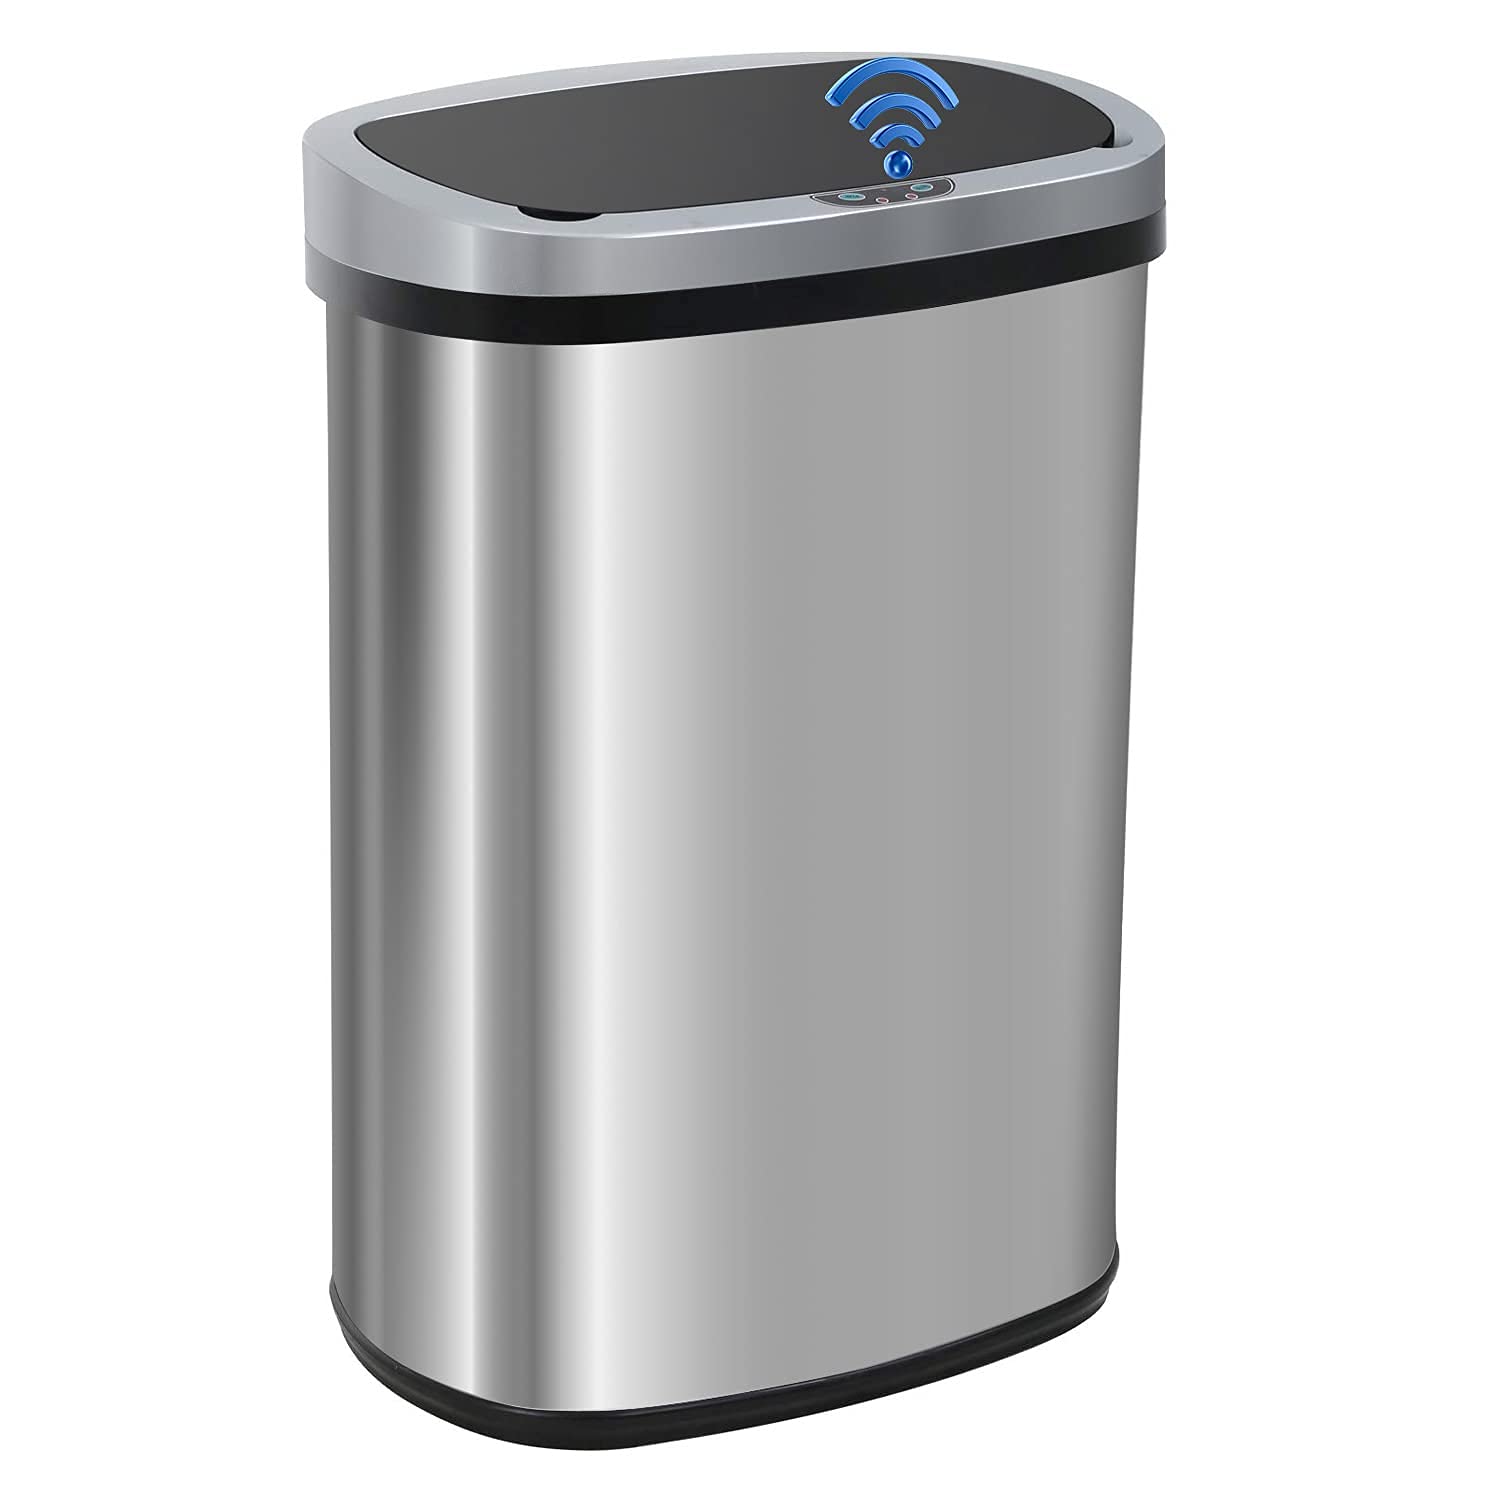 https://bigbigmart.com/wp-content/uploads/2023/07/FDW-Garbage-Can-13-Gallon-50-Liter-Kitchen-Trash-Can-for-Bathroom-Bedroom-Home-Office-Automatic-Touch-Free-High-Capacity-with-Lid-Brushed-Stainless-Steel-Waste-Bin.jpg